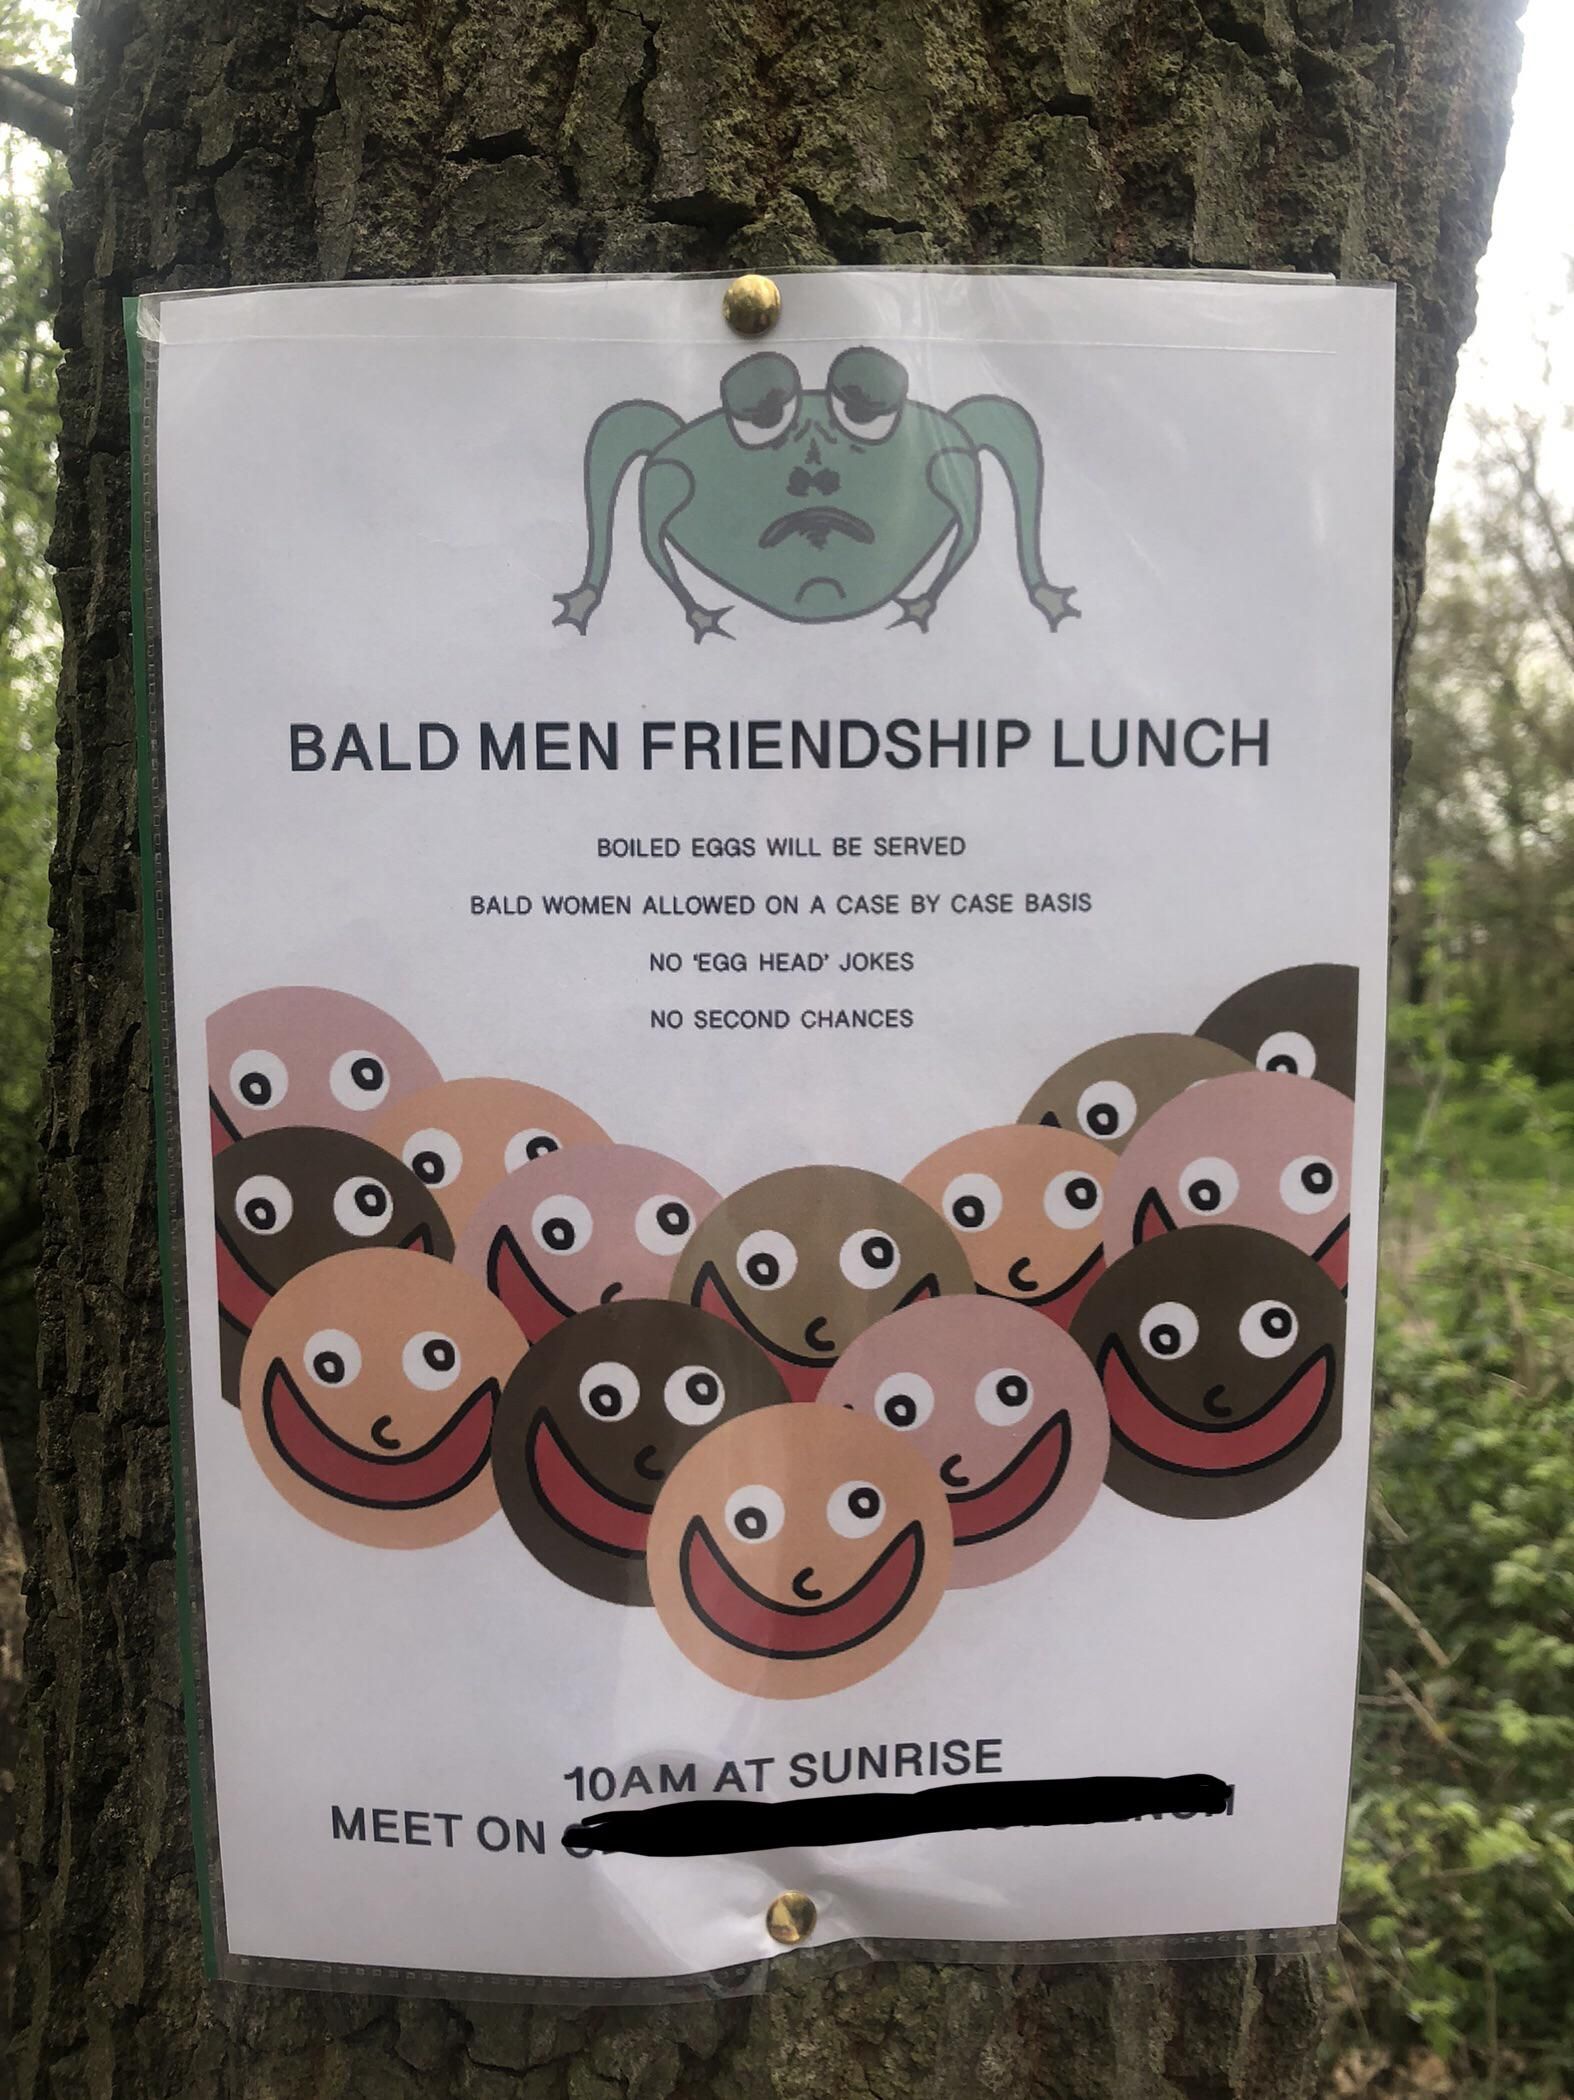 Found this in my local park today